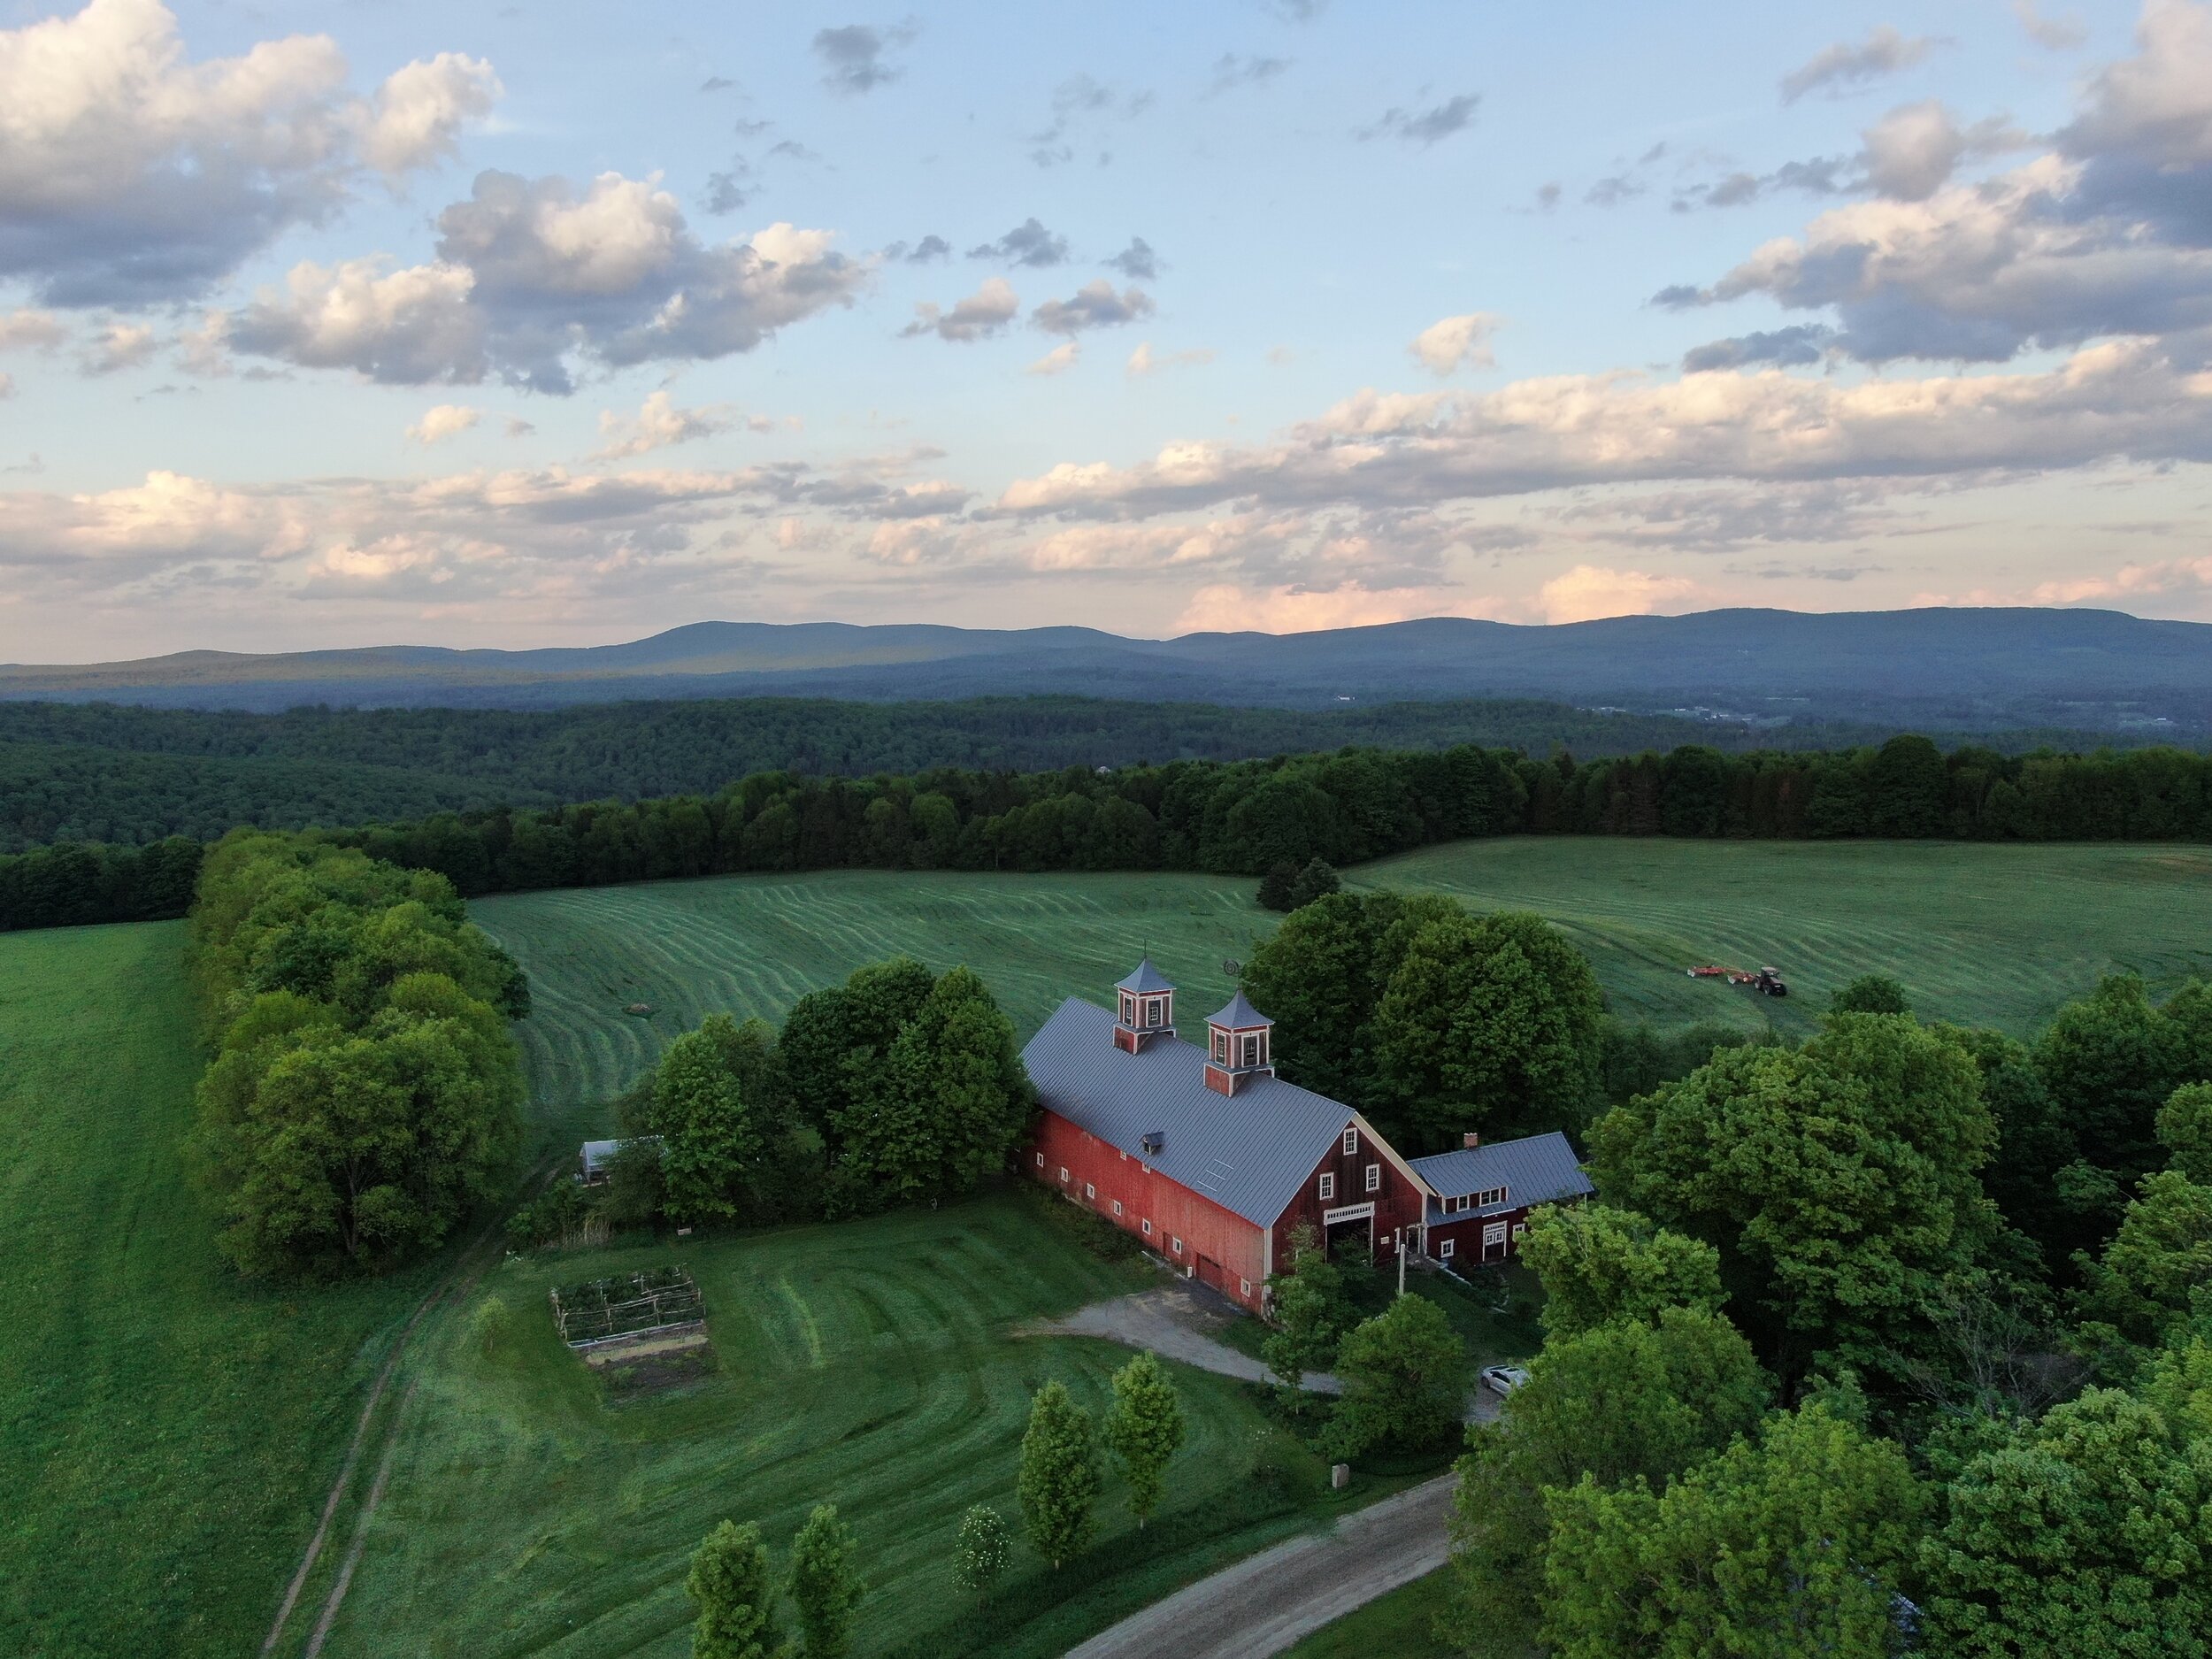 An evening aerial shot of Turning Stone Farm